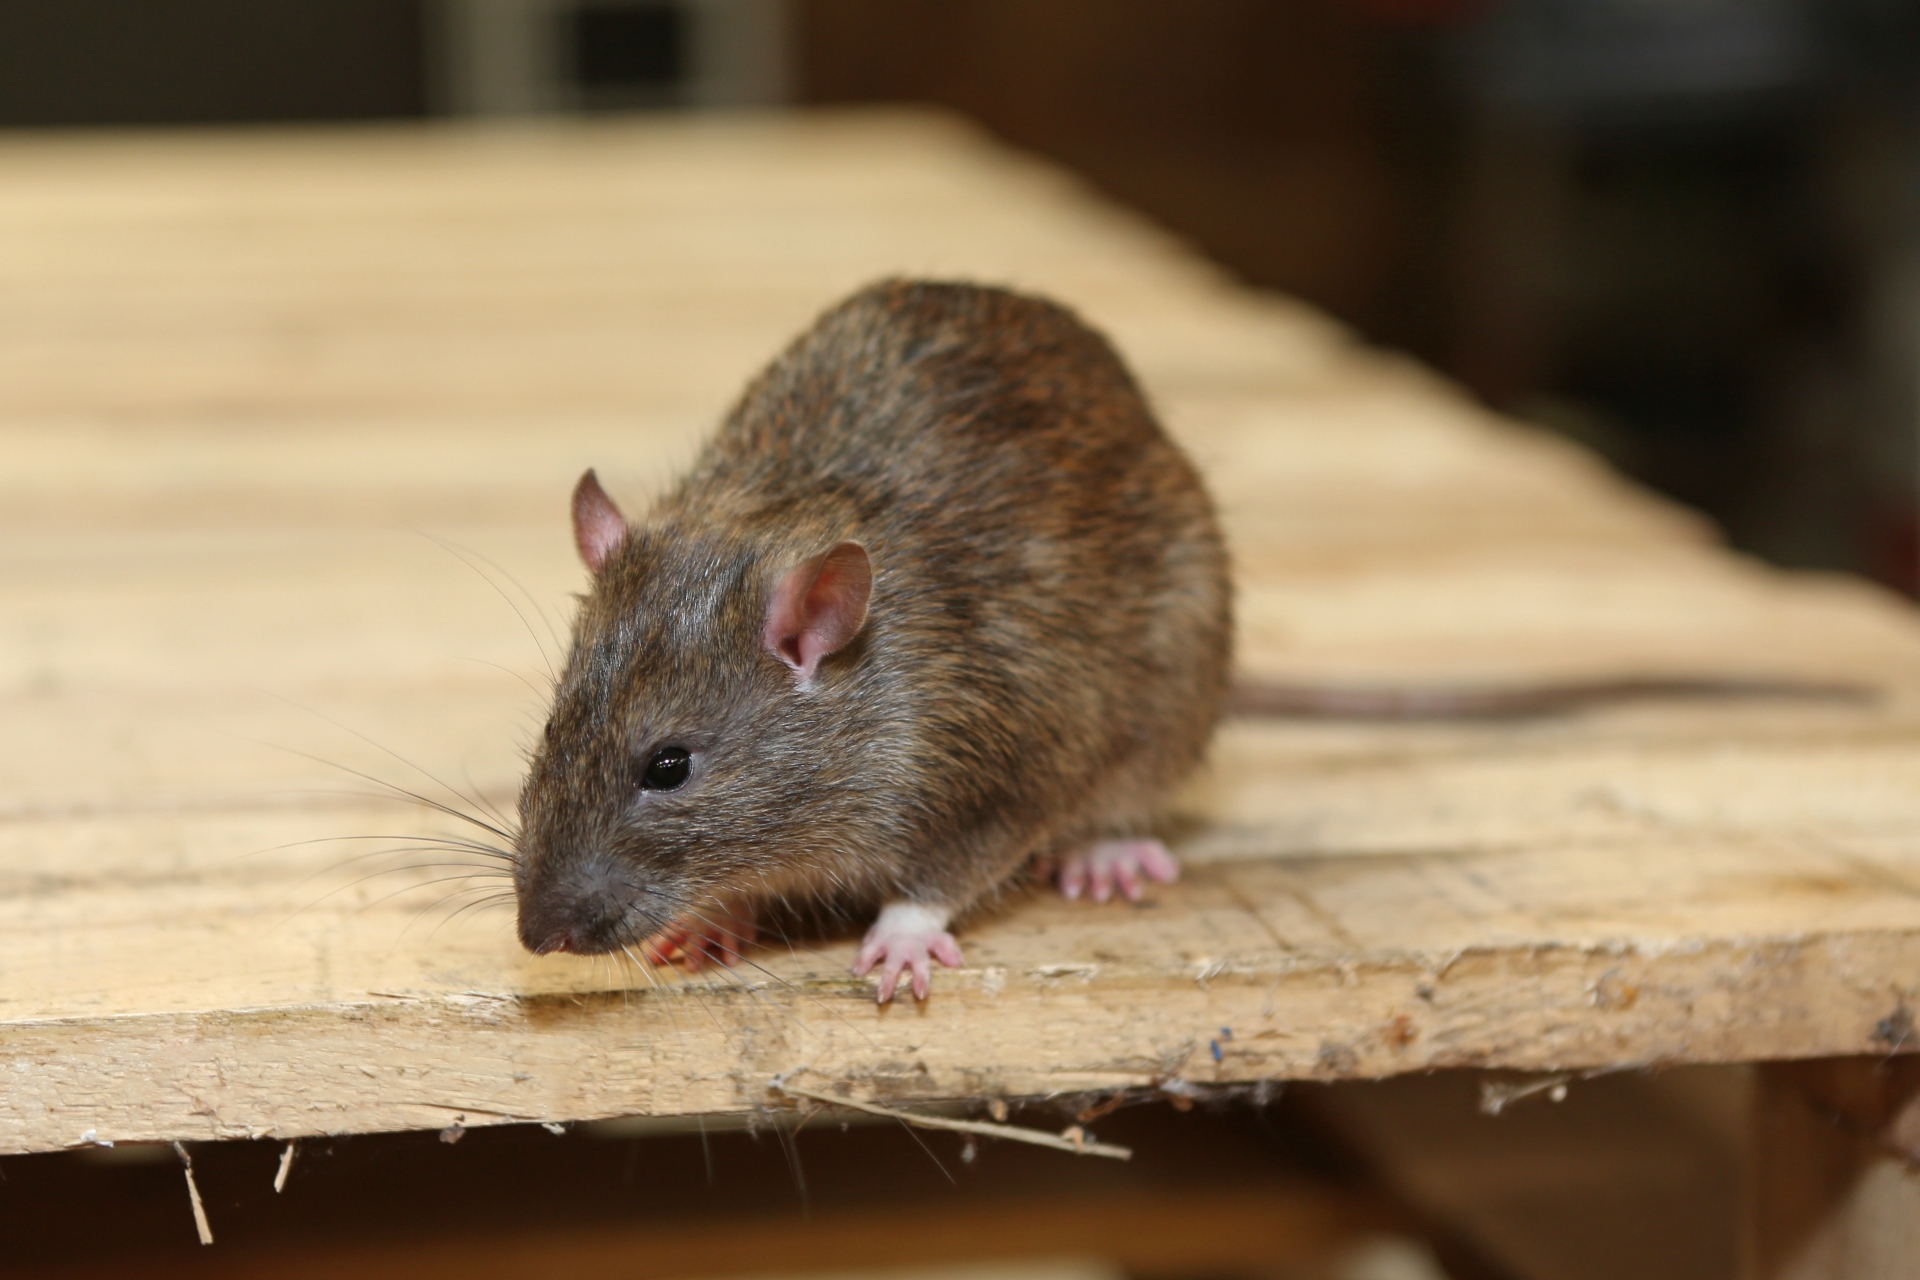 Rat extermination, Pest Control in Olympic Park, E20. Call Now 020 8166 9746